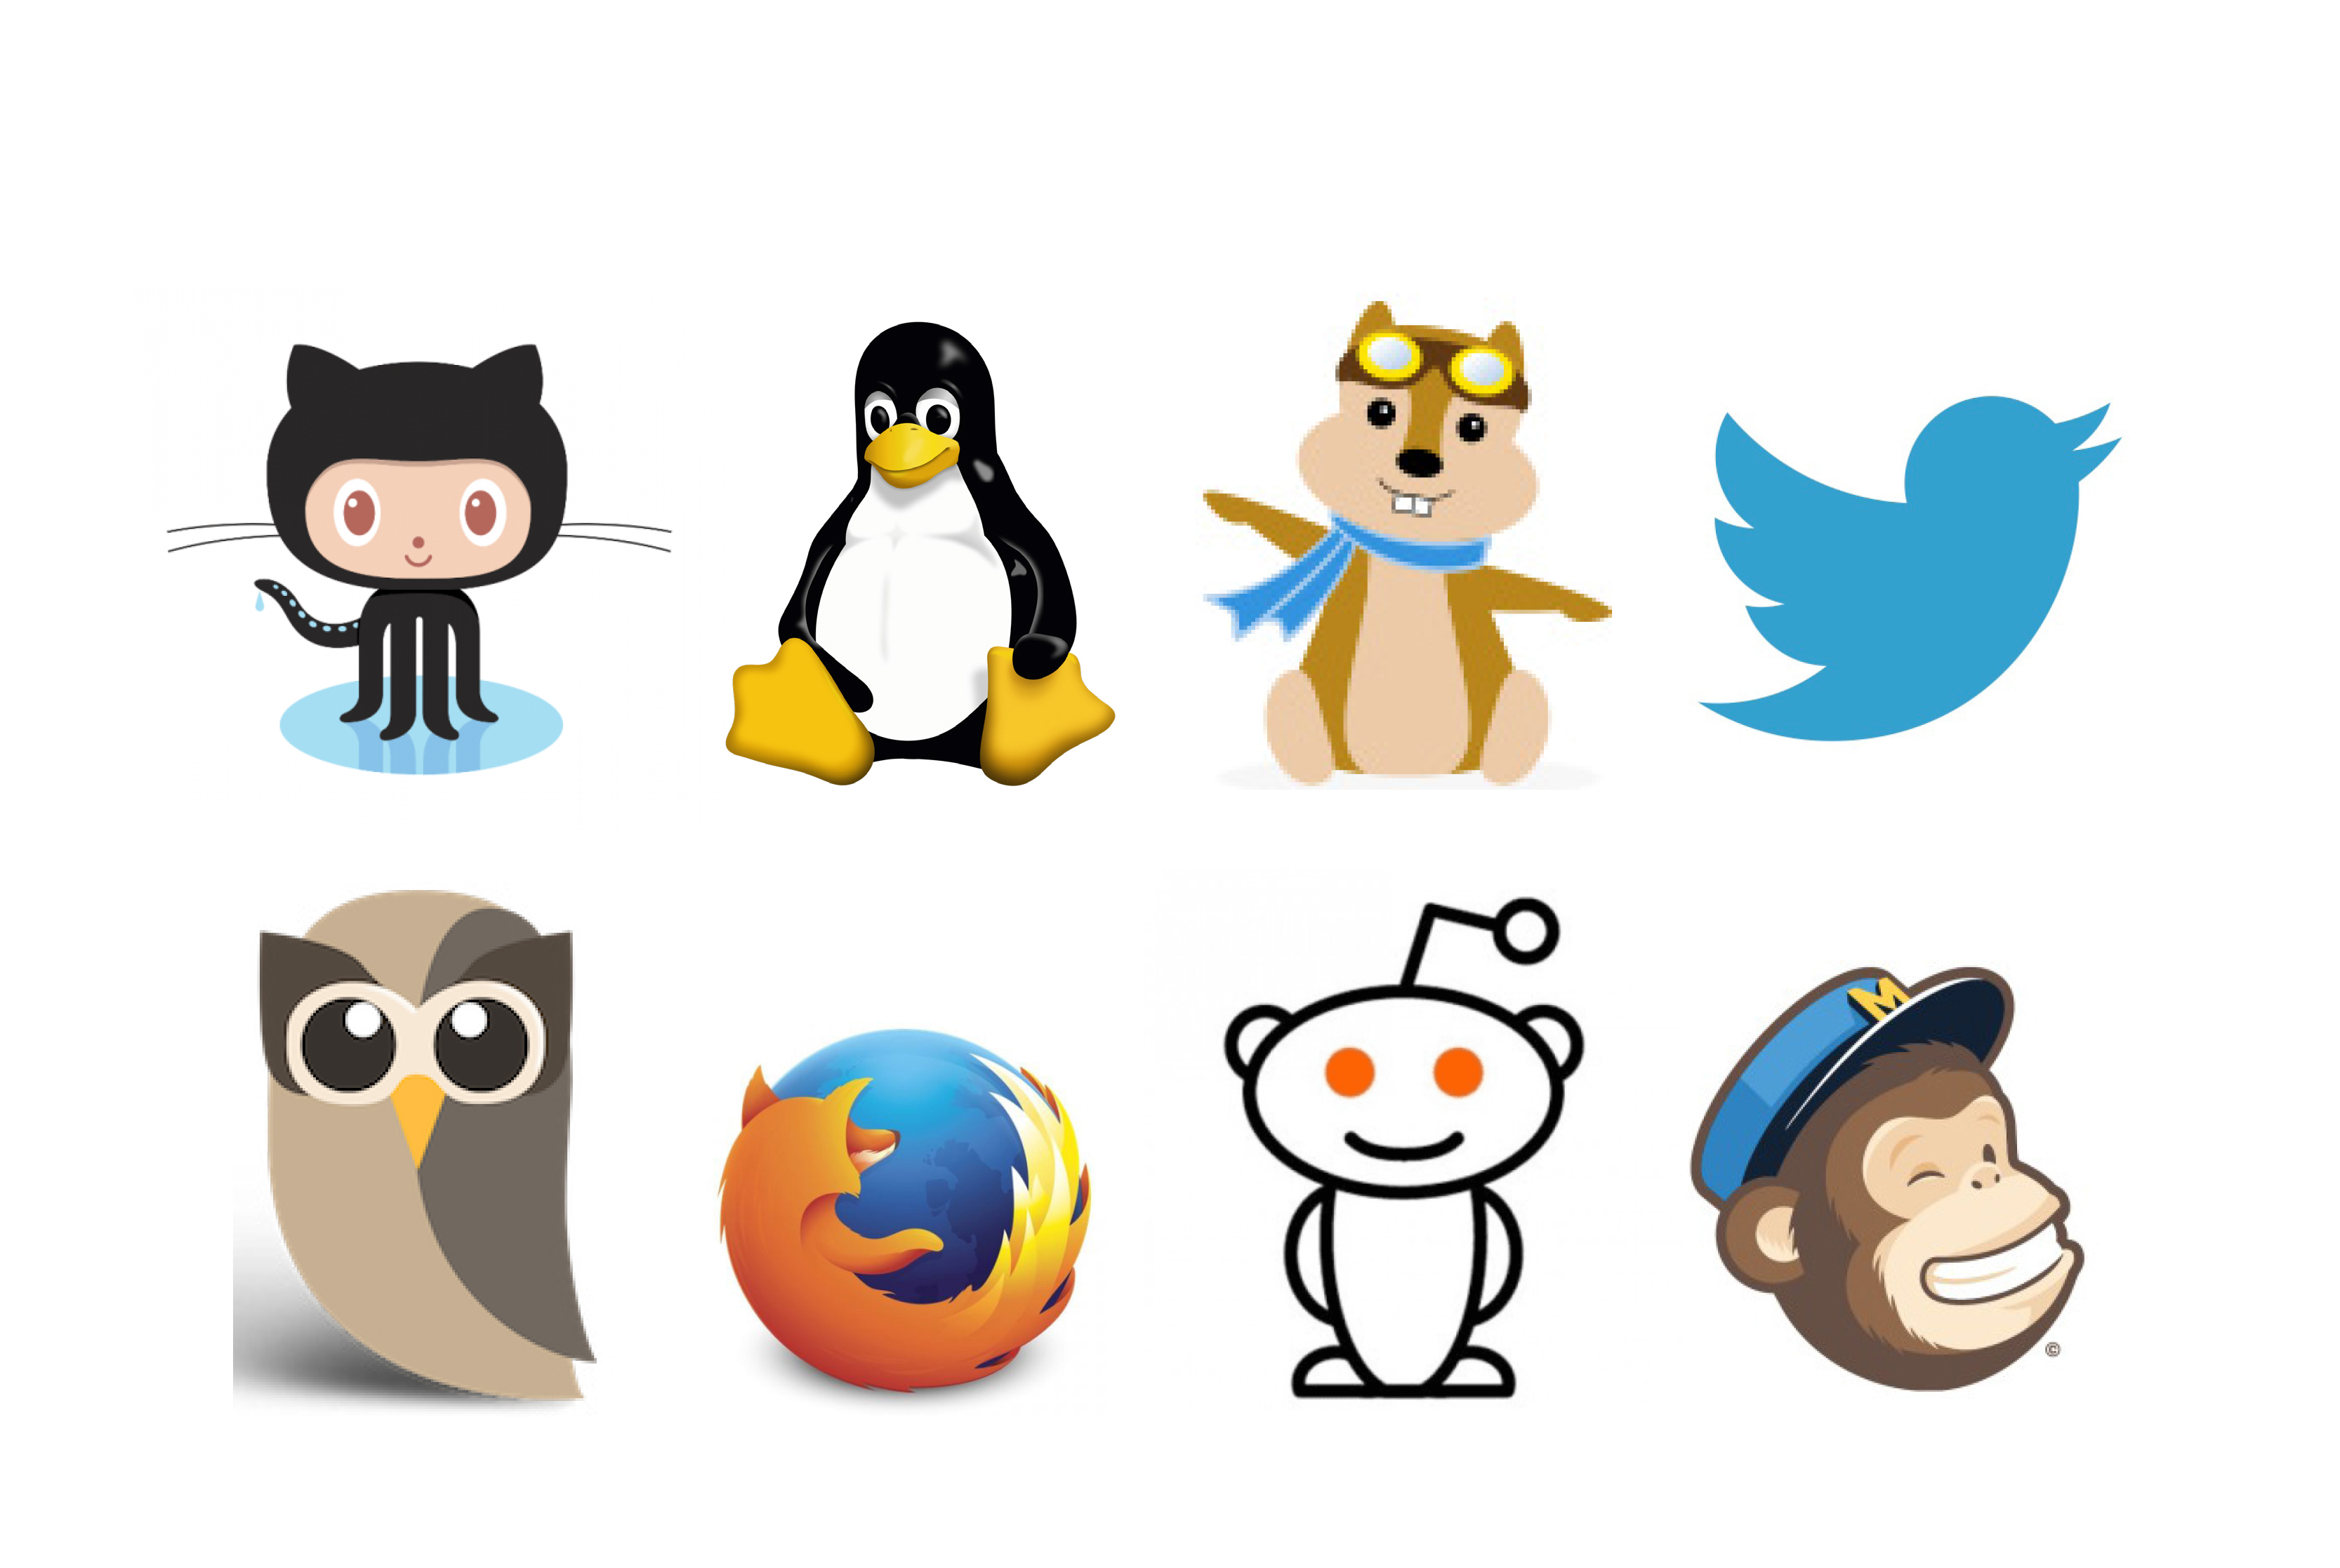 Examples of animals appearing in brand communication of "online" products and services. Image courtesy: GitHub, Linux, Hipmunk, Twitter, Hootsuite, Firefox, Reddit and MailChimp